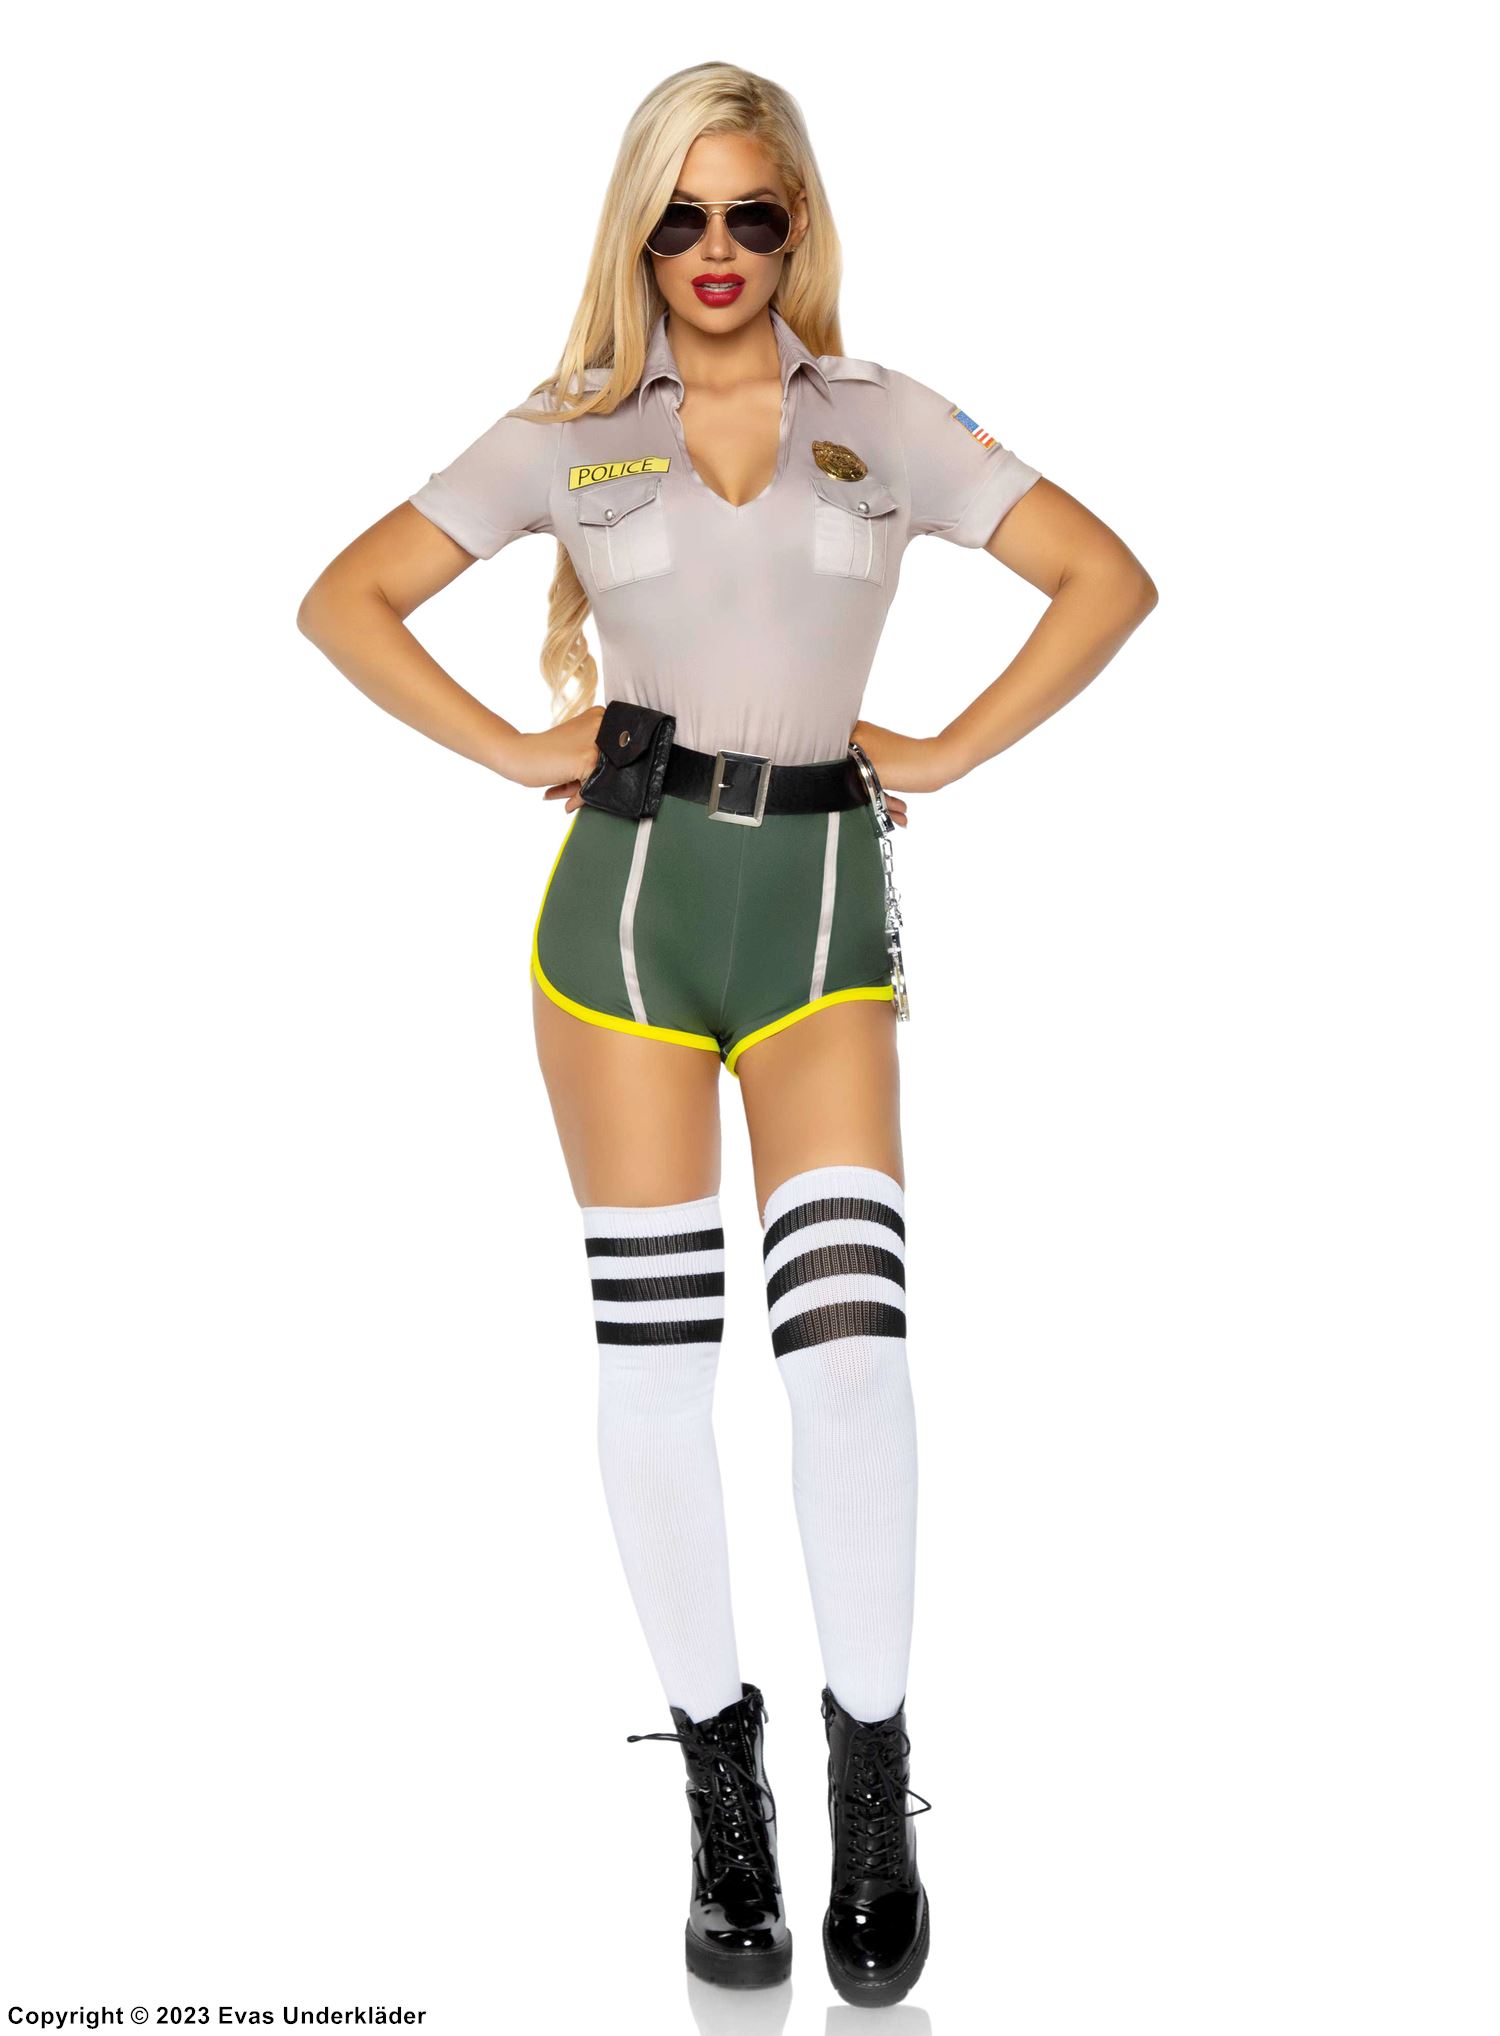 Female police officer, top and shorts costume, pockets, belt